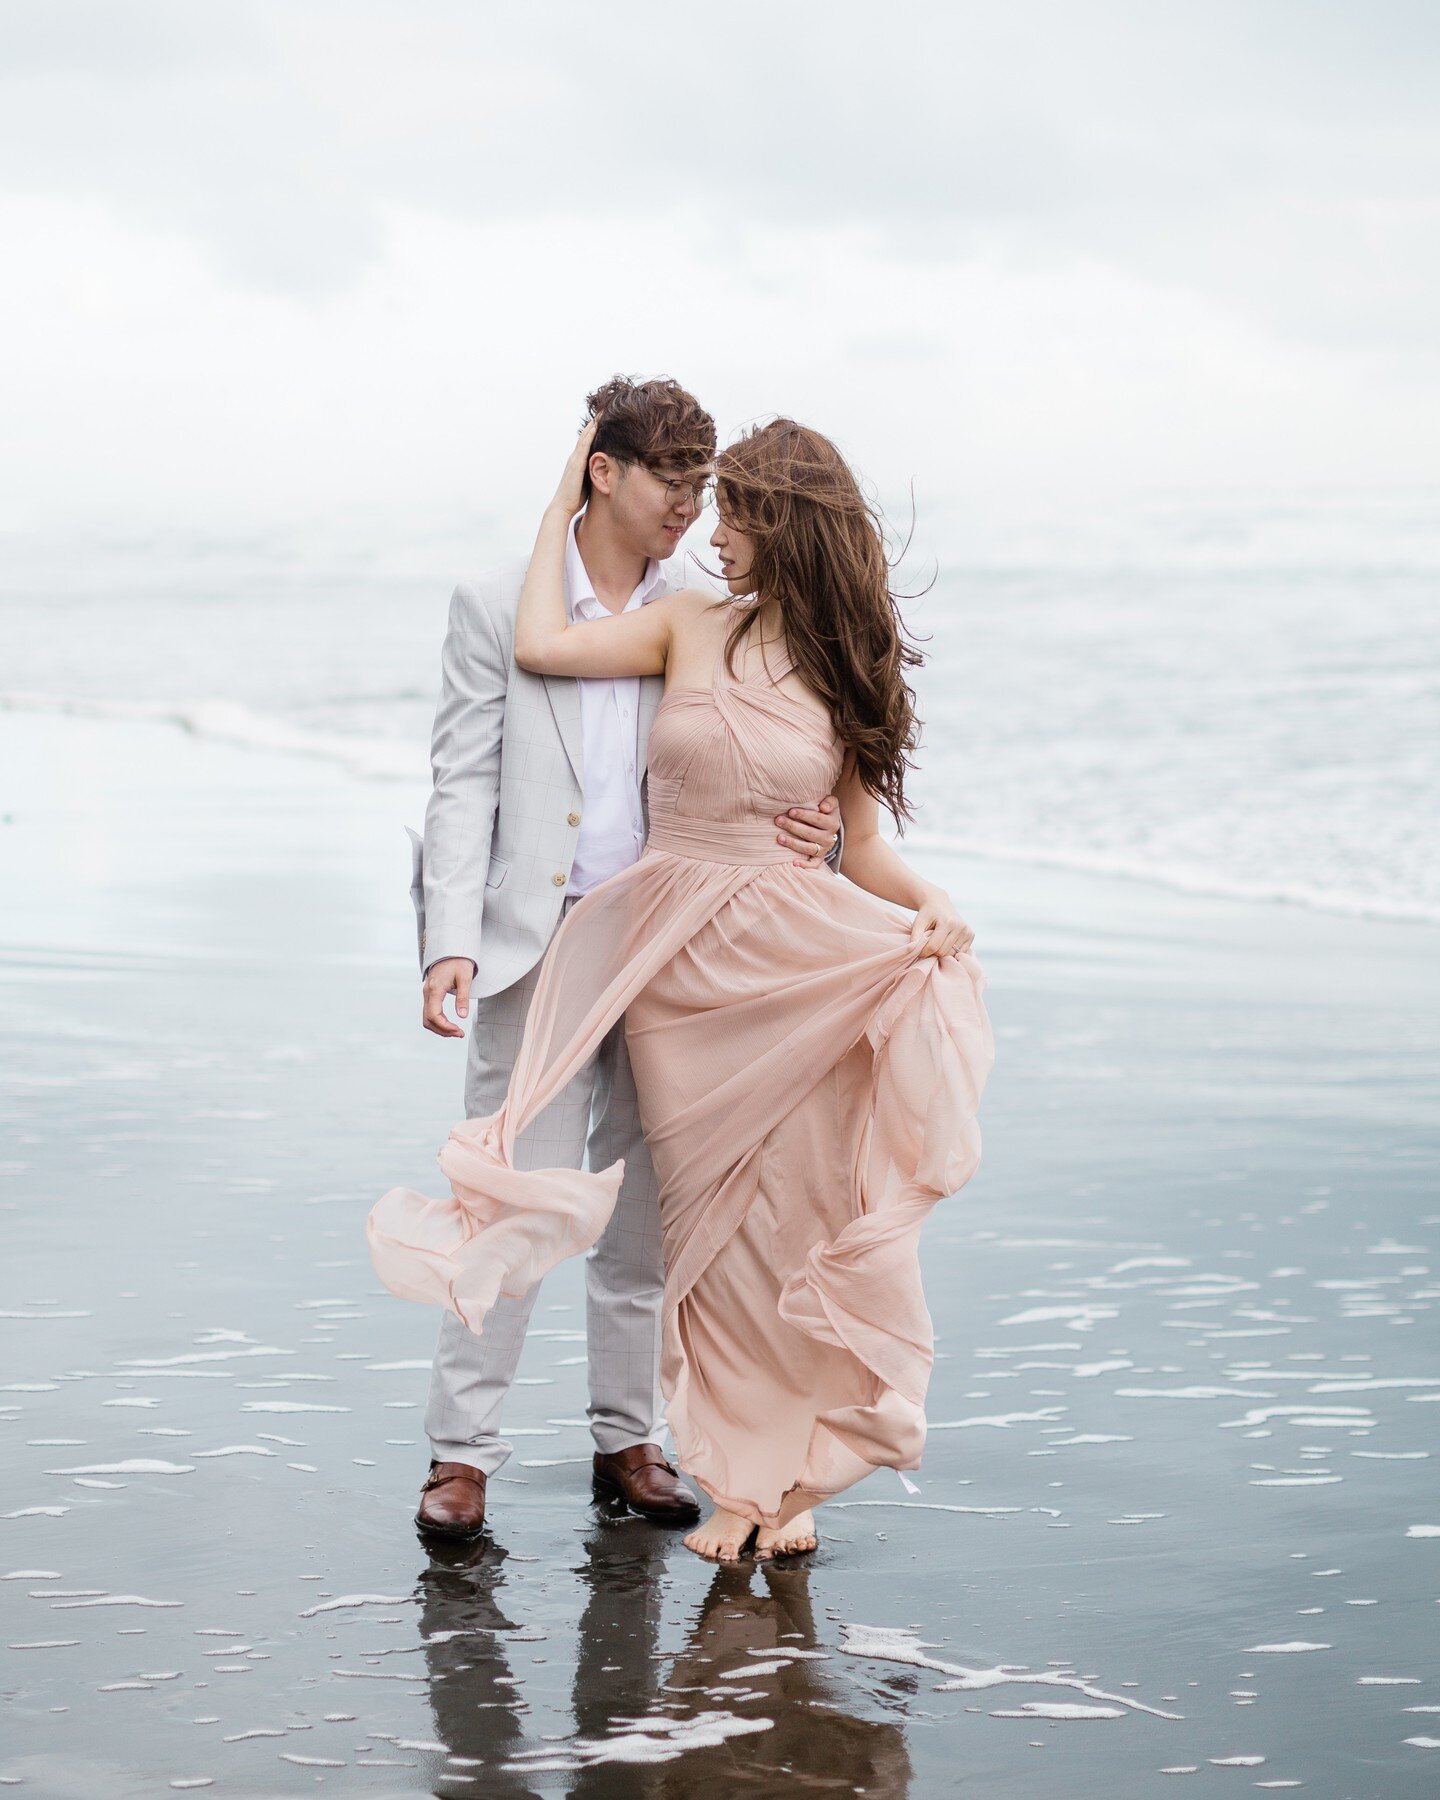 If you're unsure about what to wear to an engagement shoot, here are a couple of tips I always give my clients:

1. Neutral tones always work
2. Flowing dresses add movement/texture
3. Solid colors with no patterns
4. Choose a clothing style to suit 